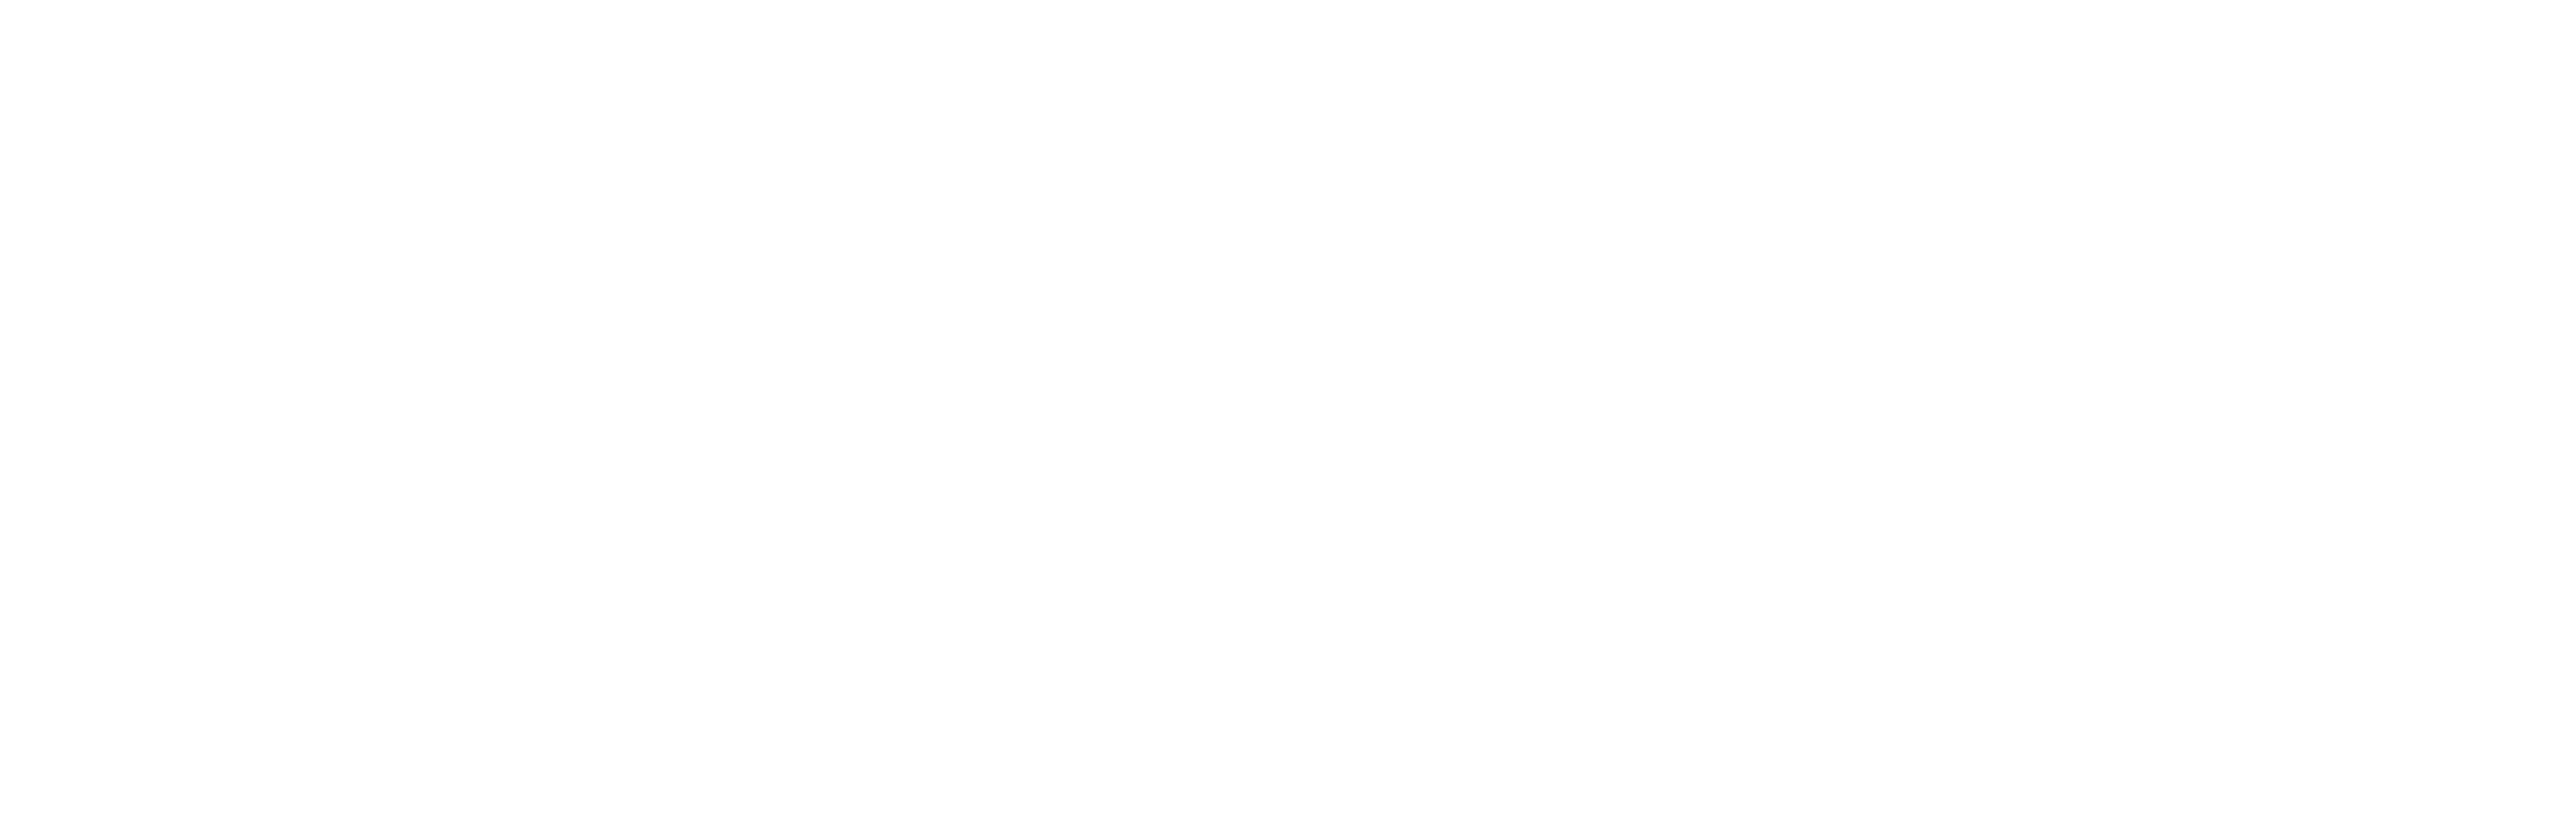 dead space extraction story